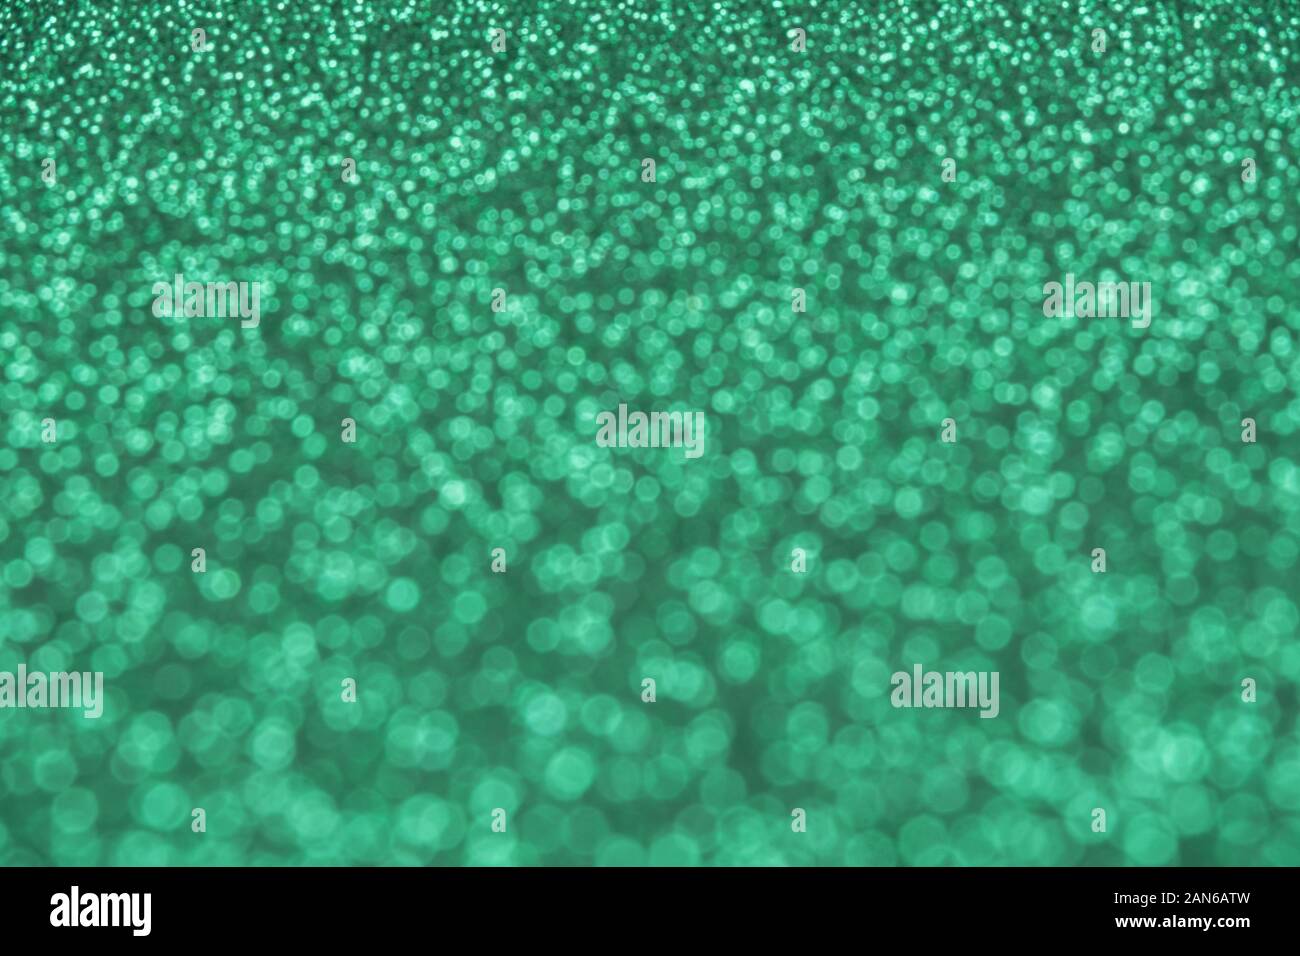 Beautiful green background of unfocused sequins and glitter Stock Photo